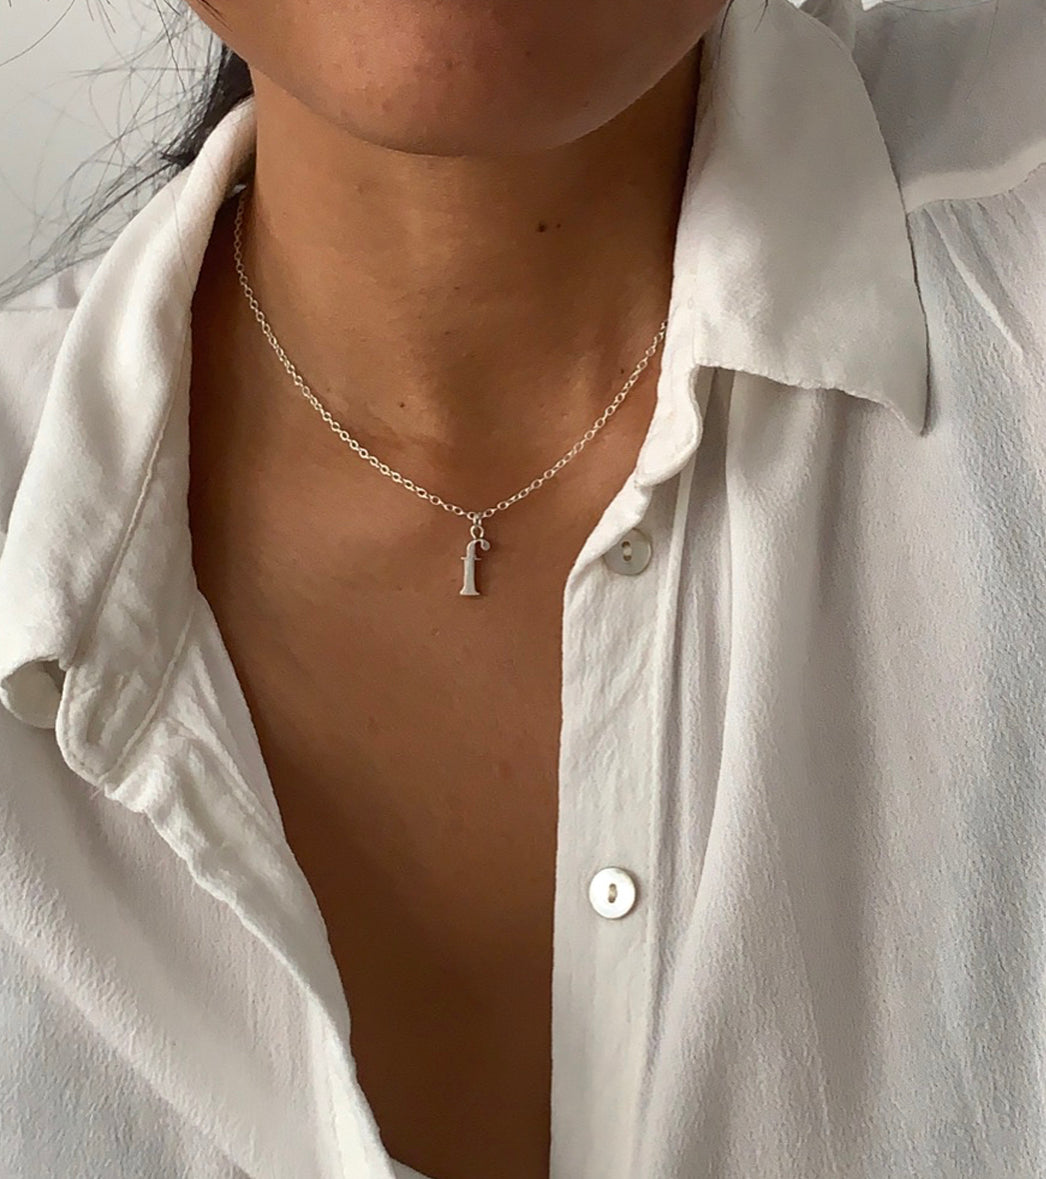 Necklace | The chunky initial